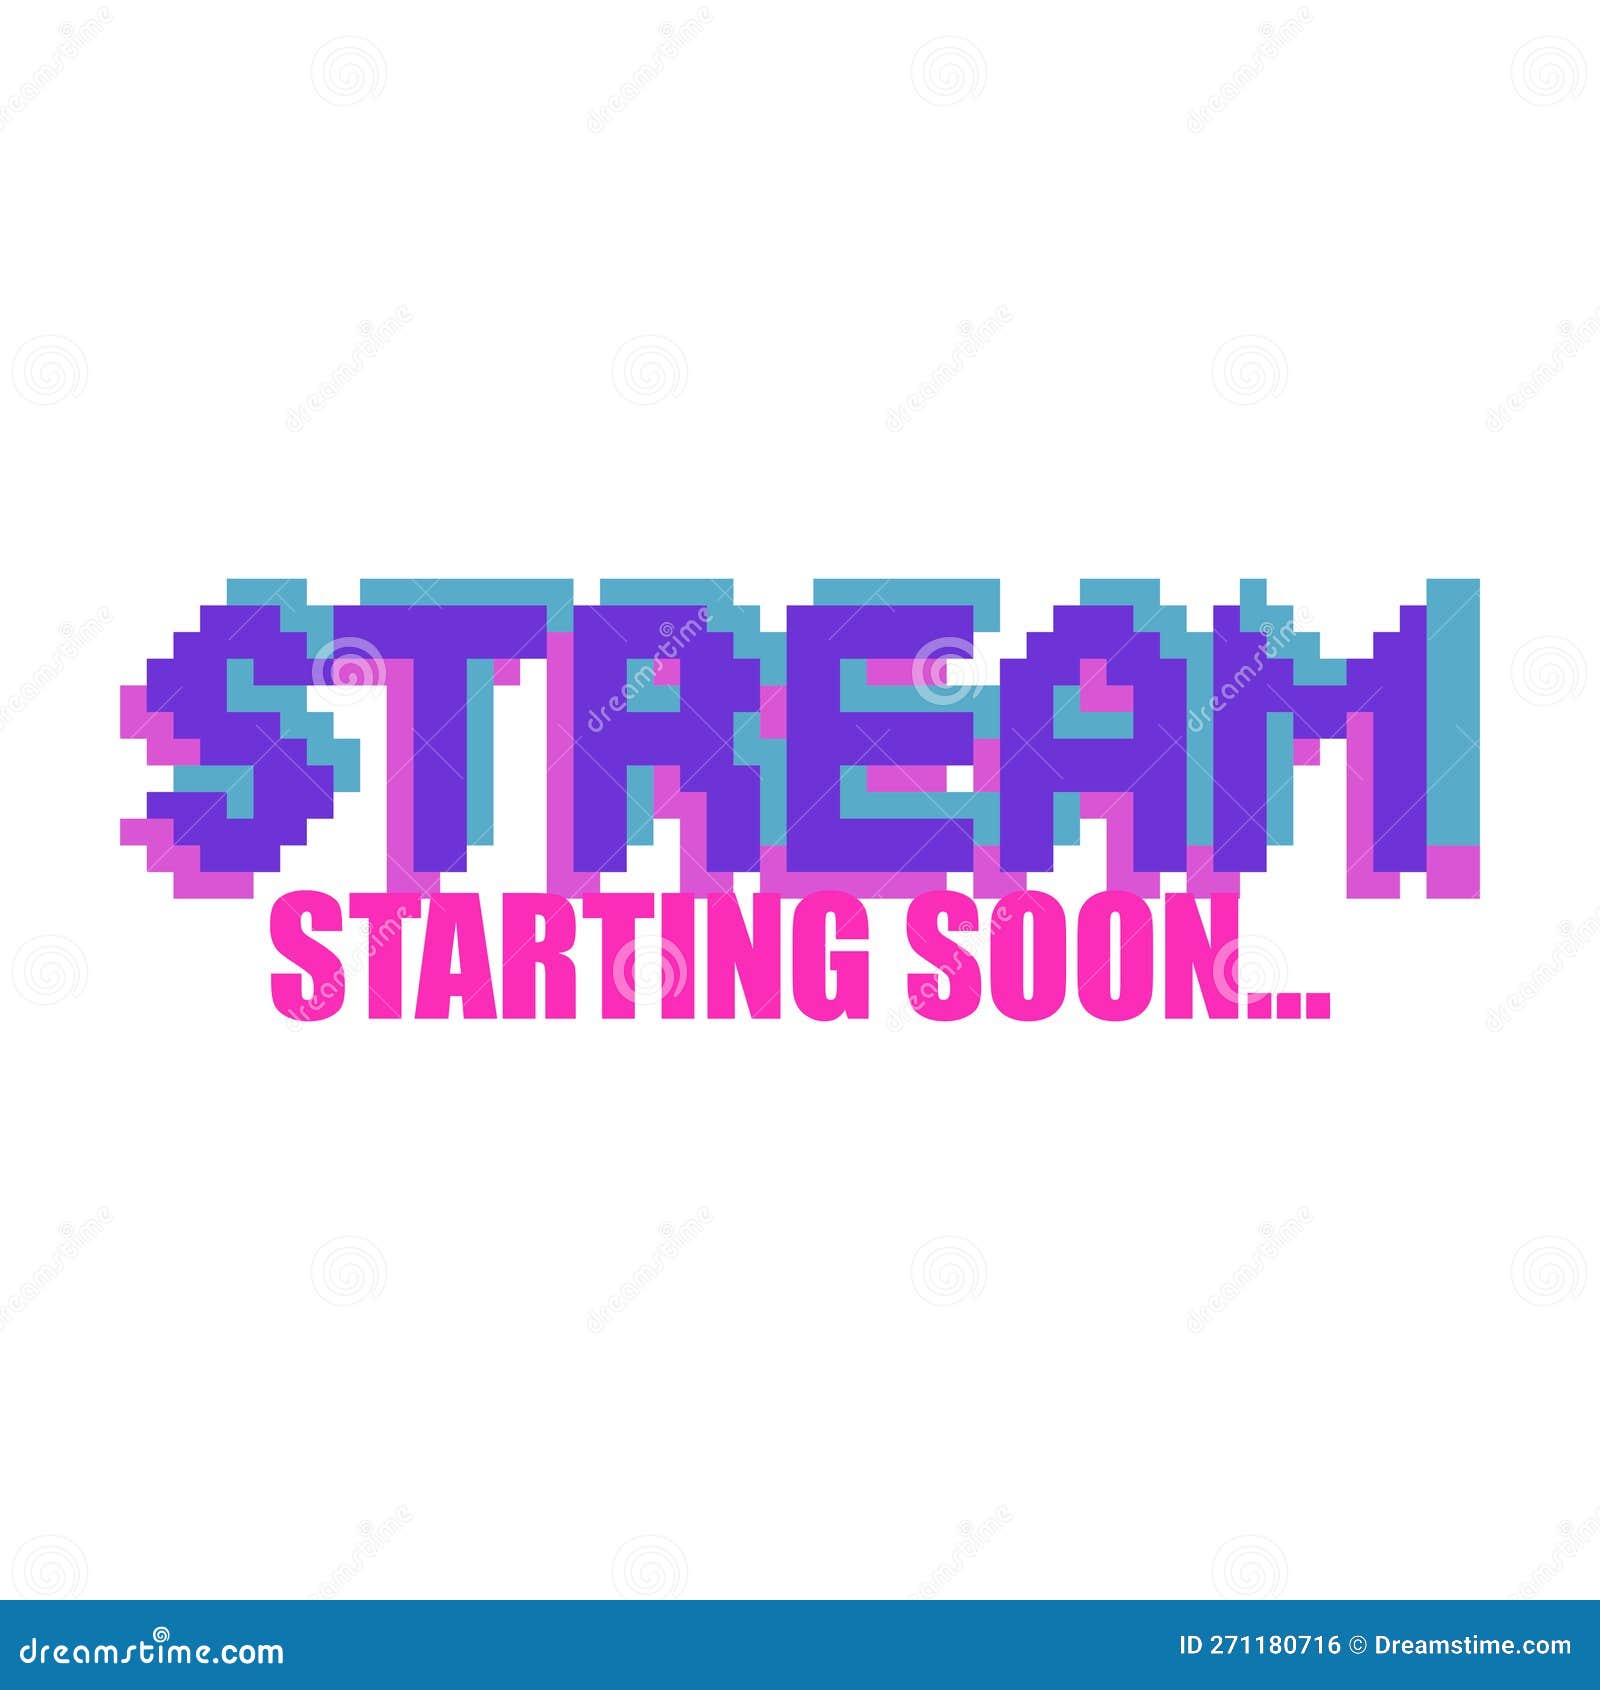 Pixilart - Stream starting soon text by Anonymous